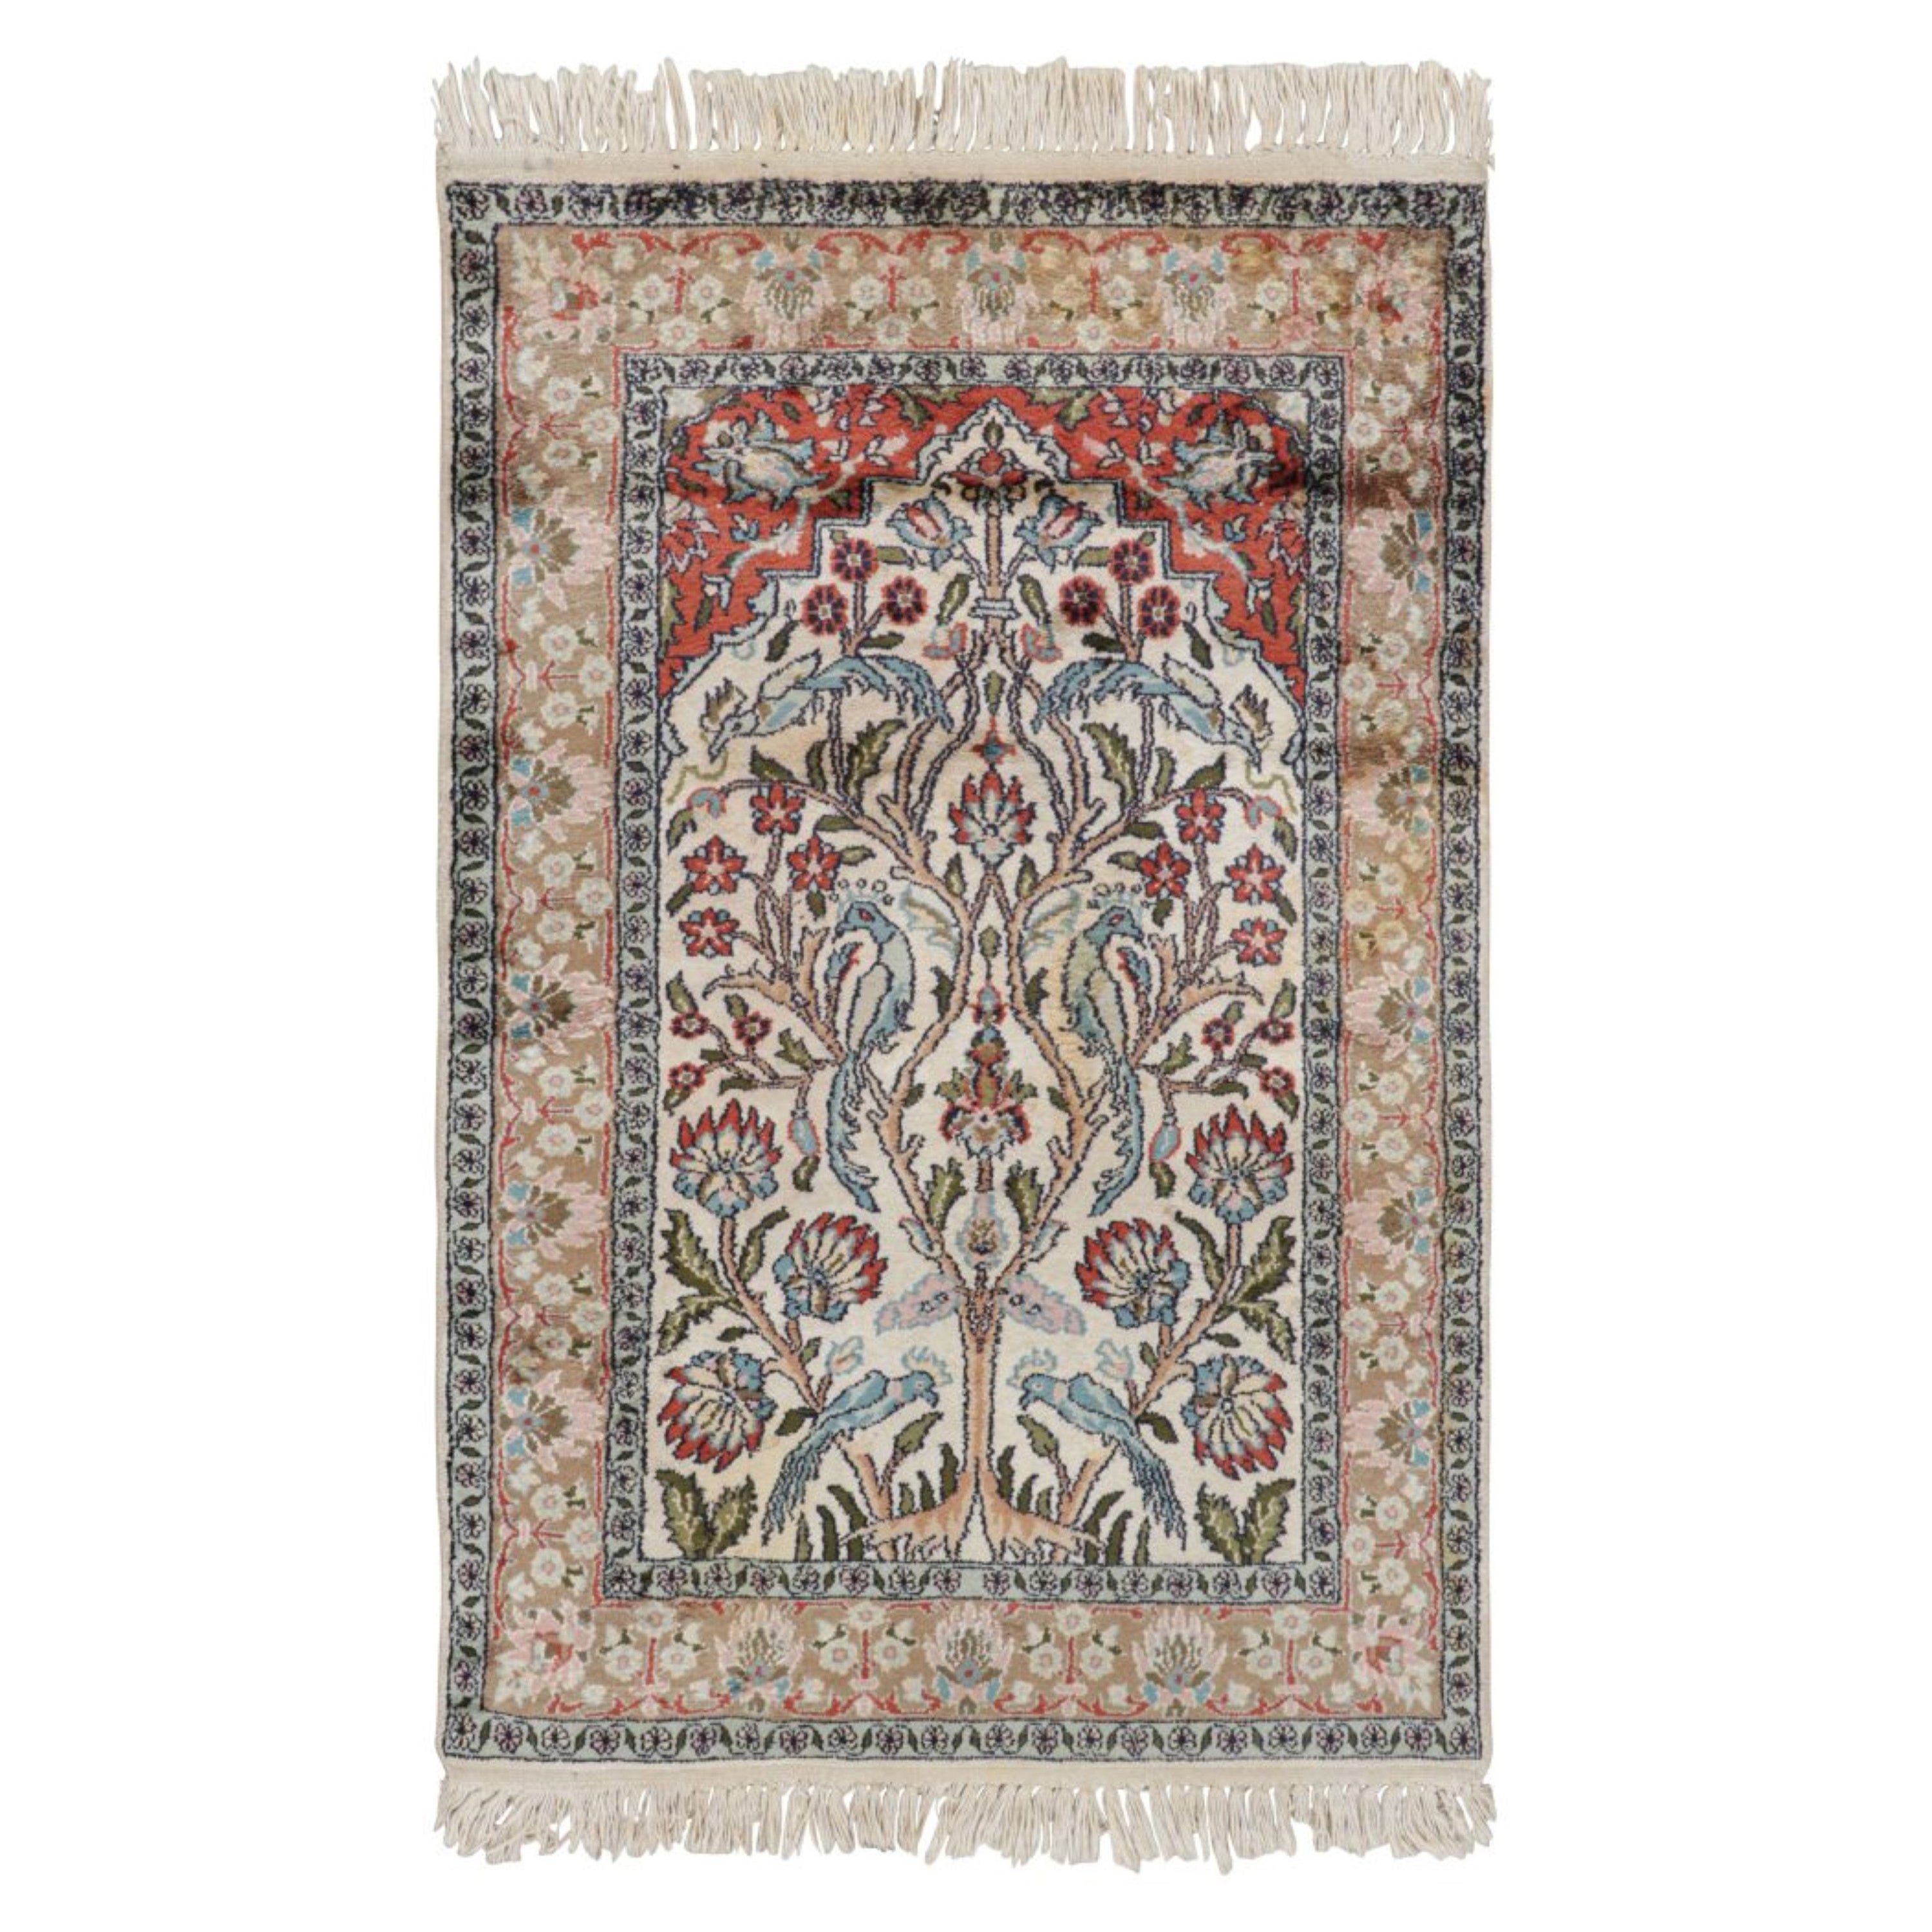 Antique Kashmir Rug With Pictorials and Floral Patterns, From Rug & Kilim For Sale